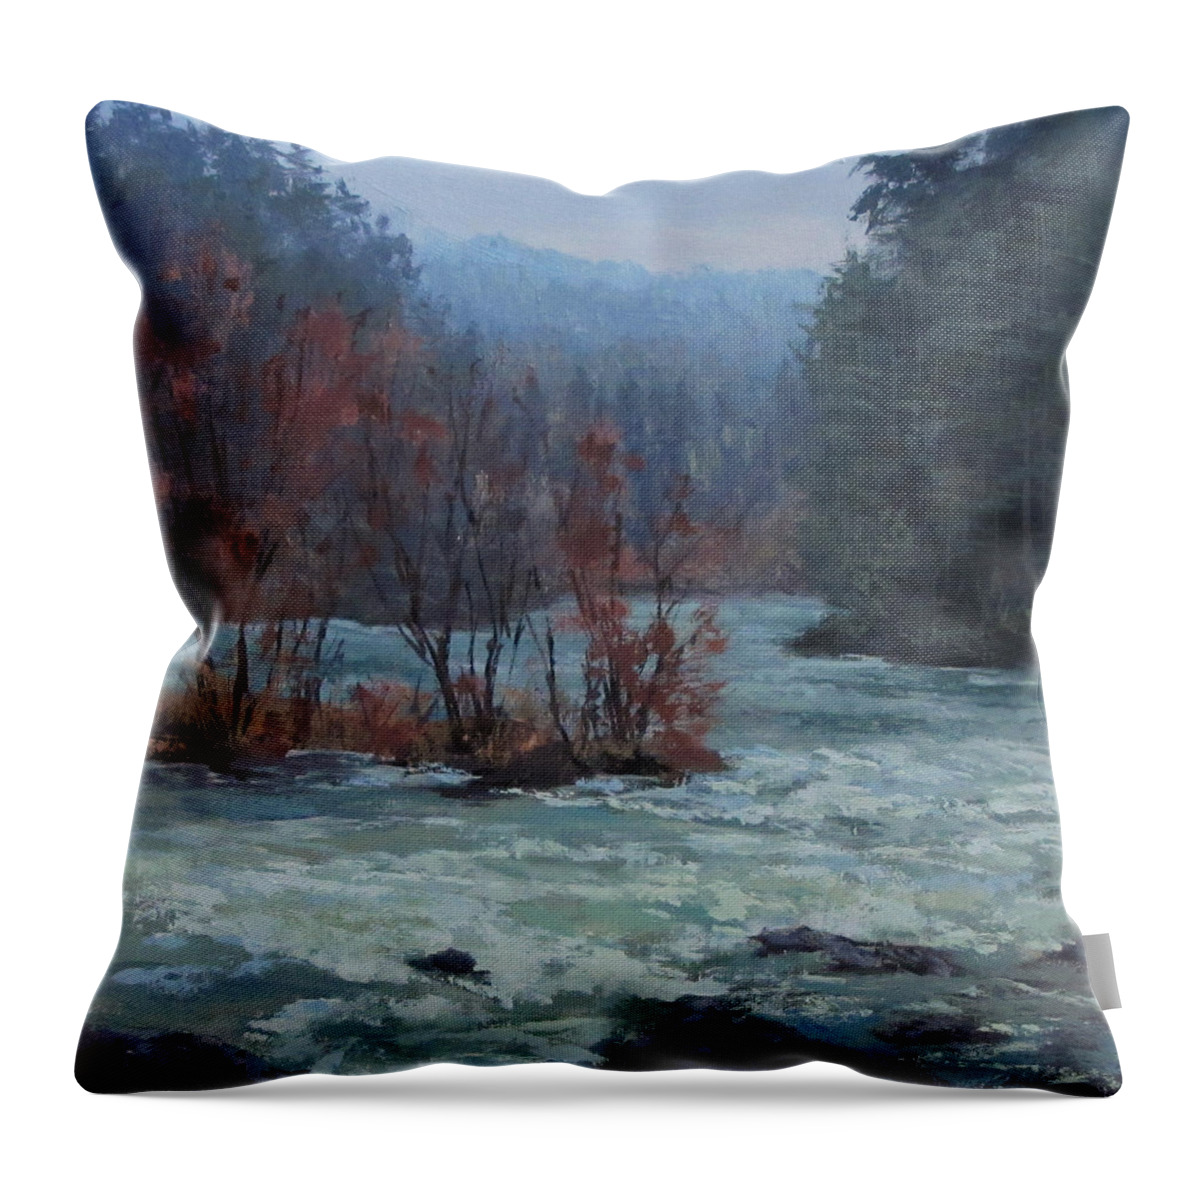 Water Throw Pillow featuring the painting High Water by Karen Ilari